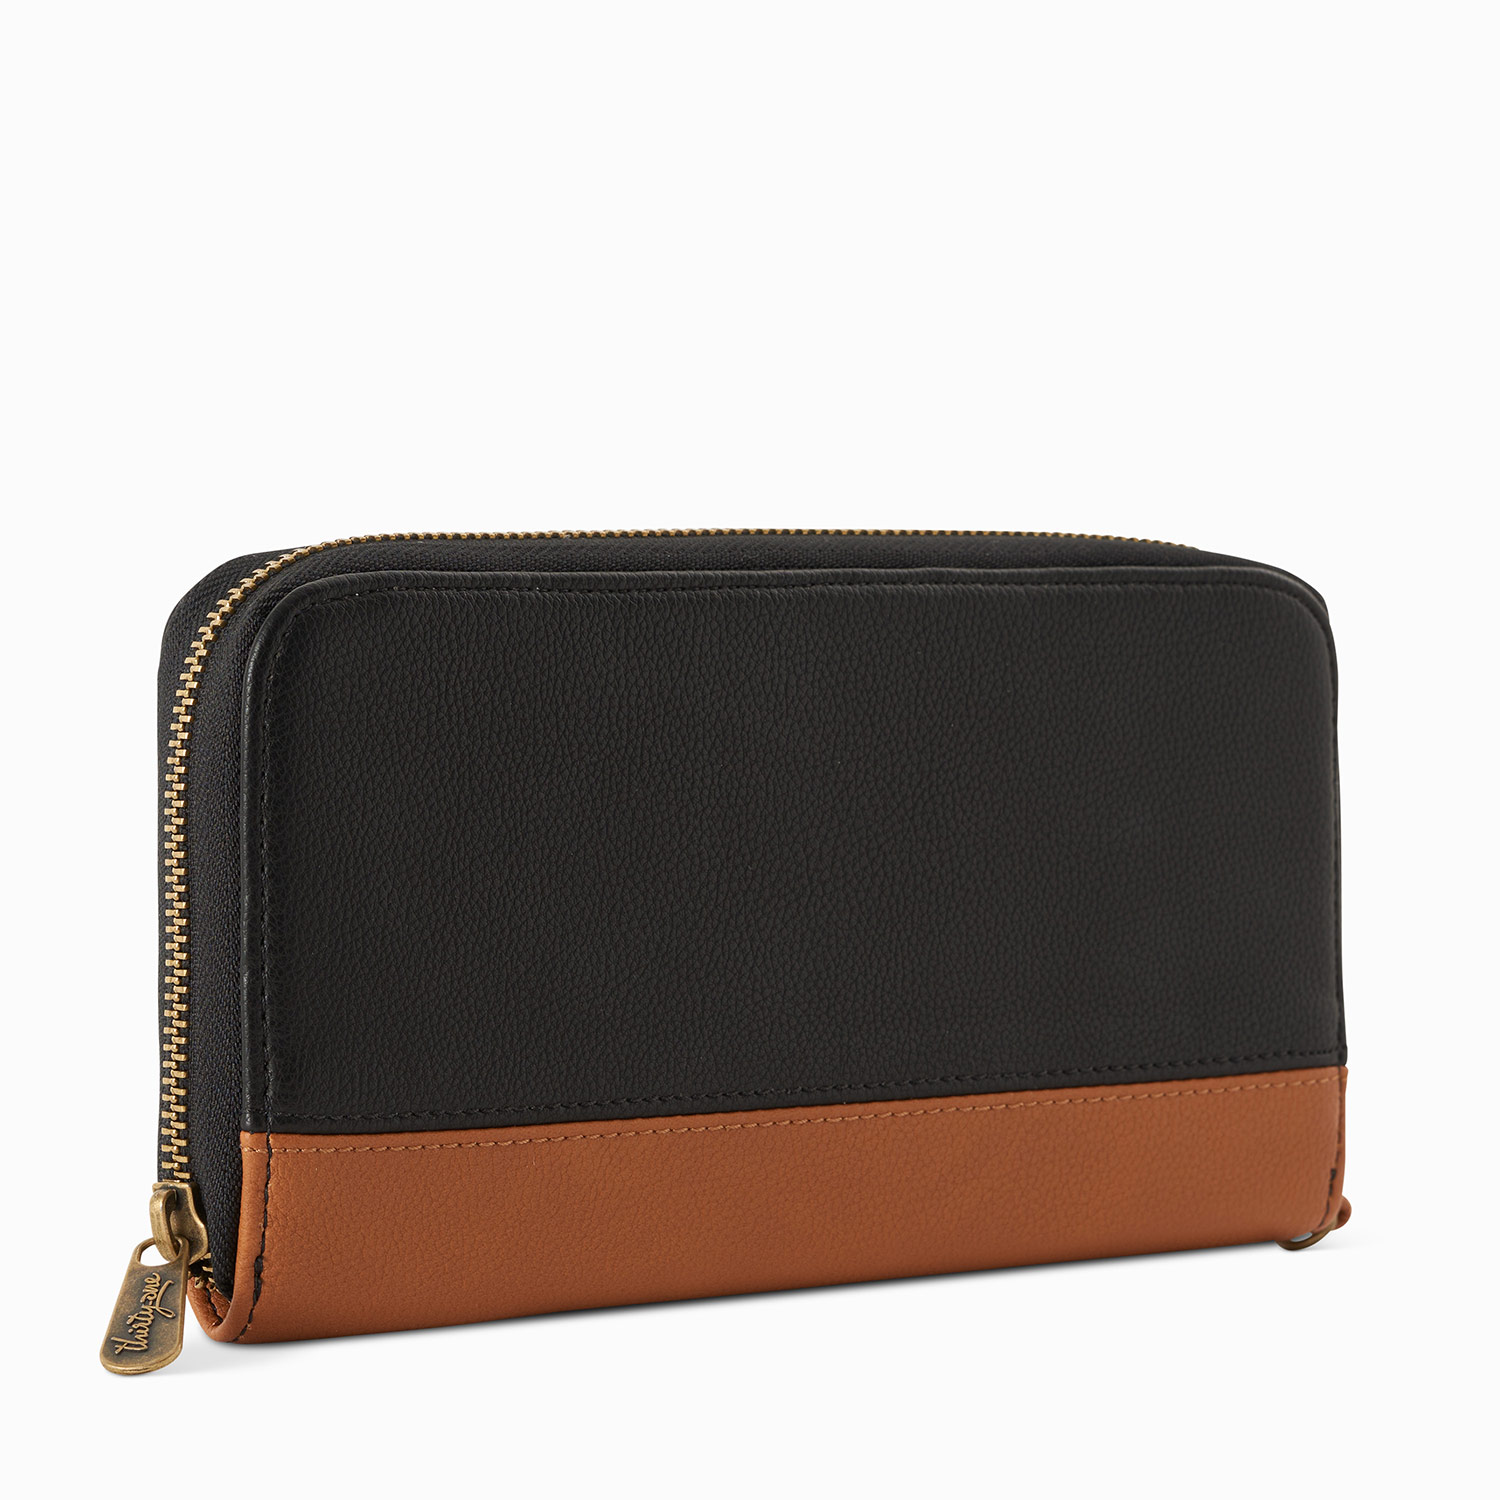 Thirty-One Gifts - Have you met our All About the Benjamin Wallet